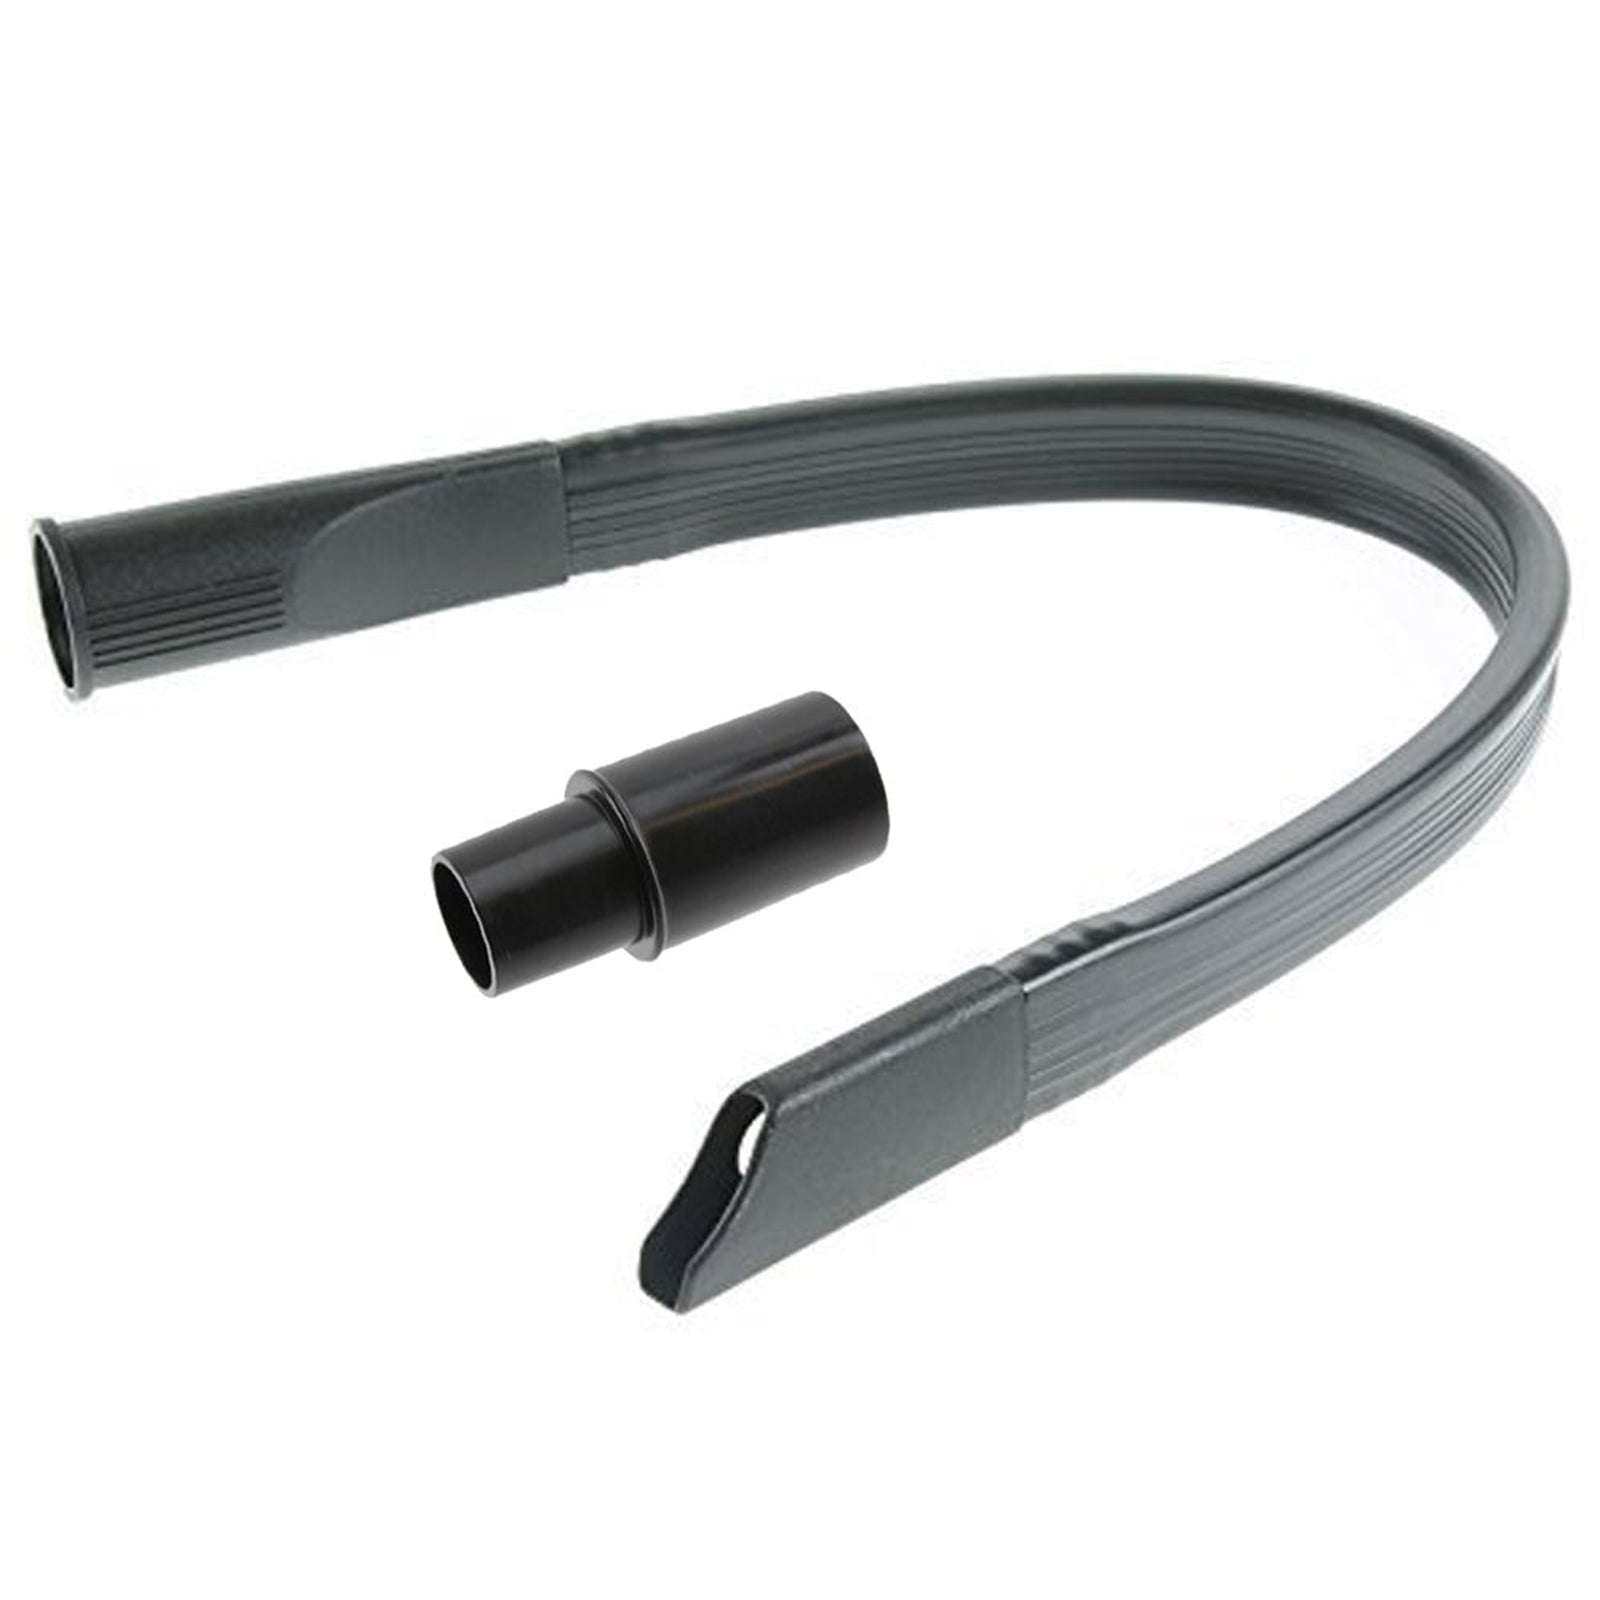 Flexible Crevice Tool Extra Long compatible with TRUVOX Vacuum Cleaner (32mm or 35mm)